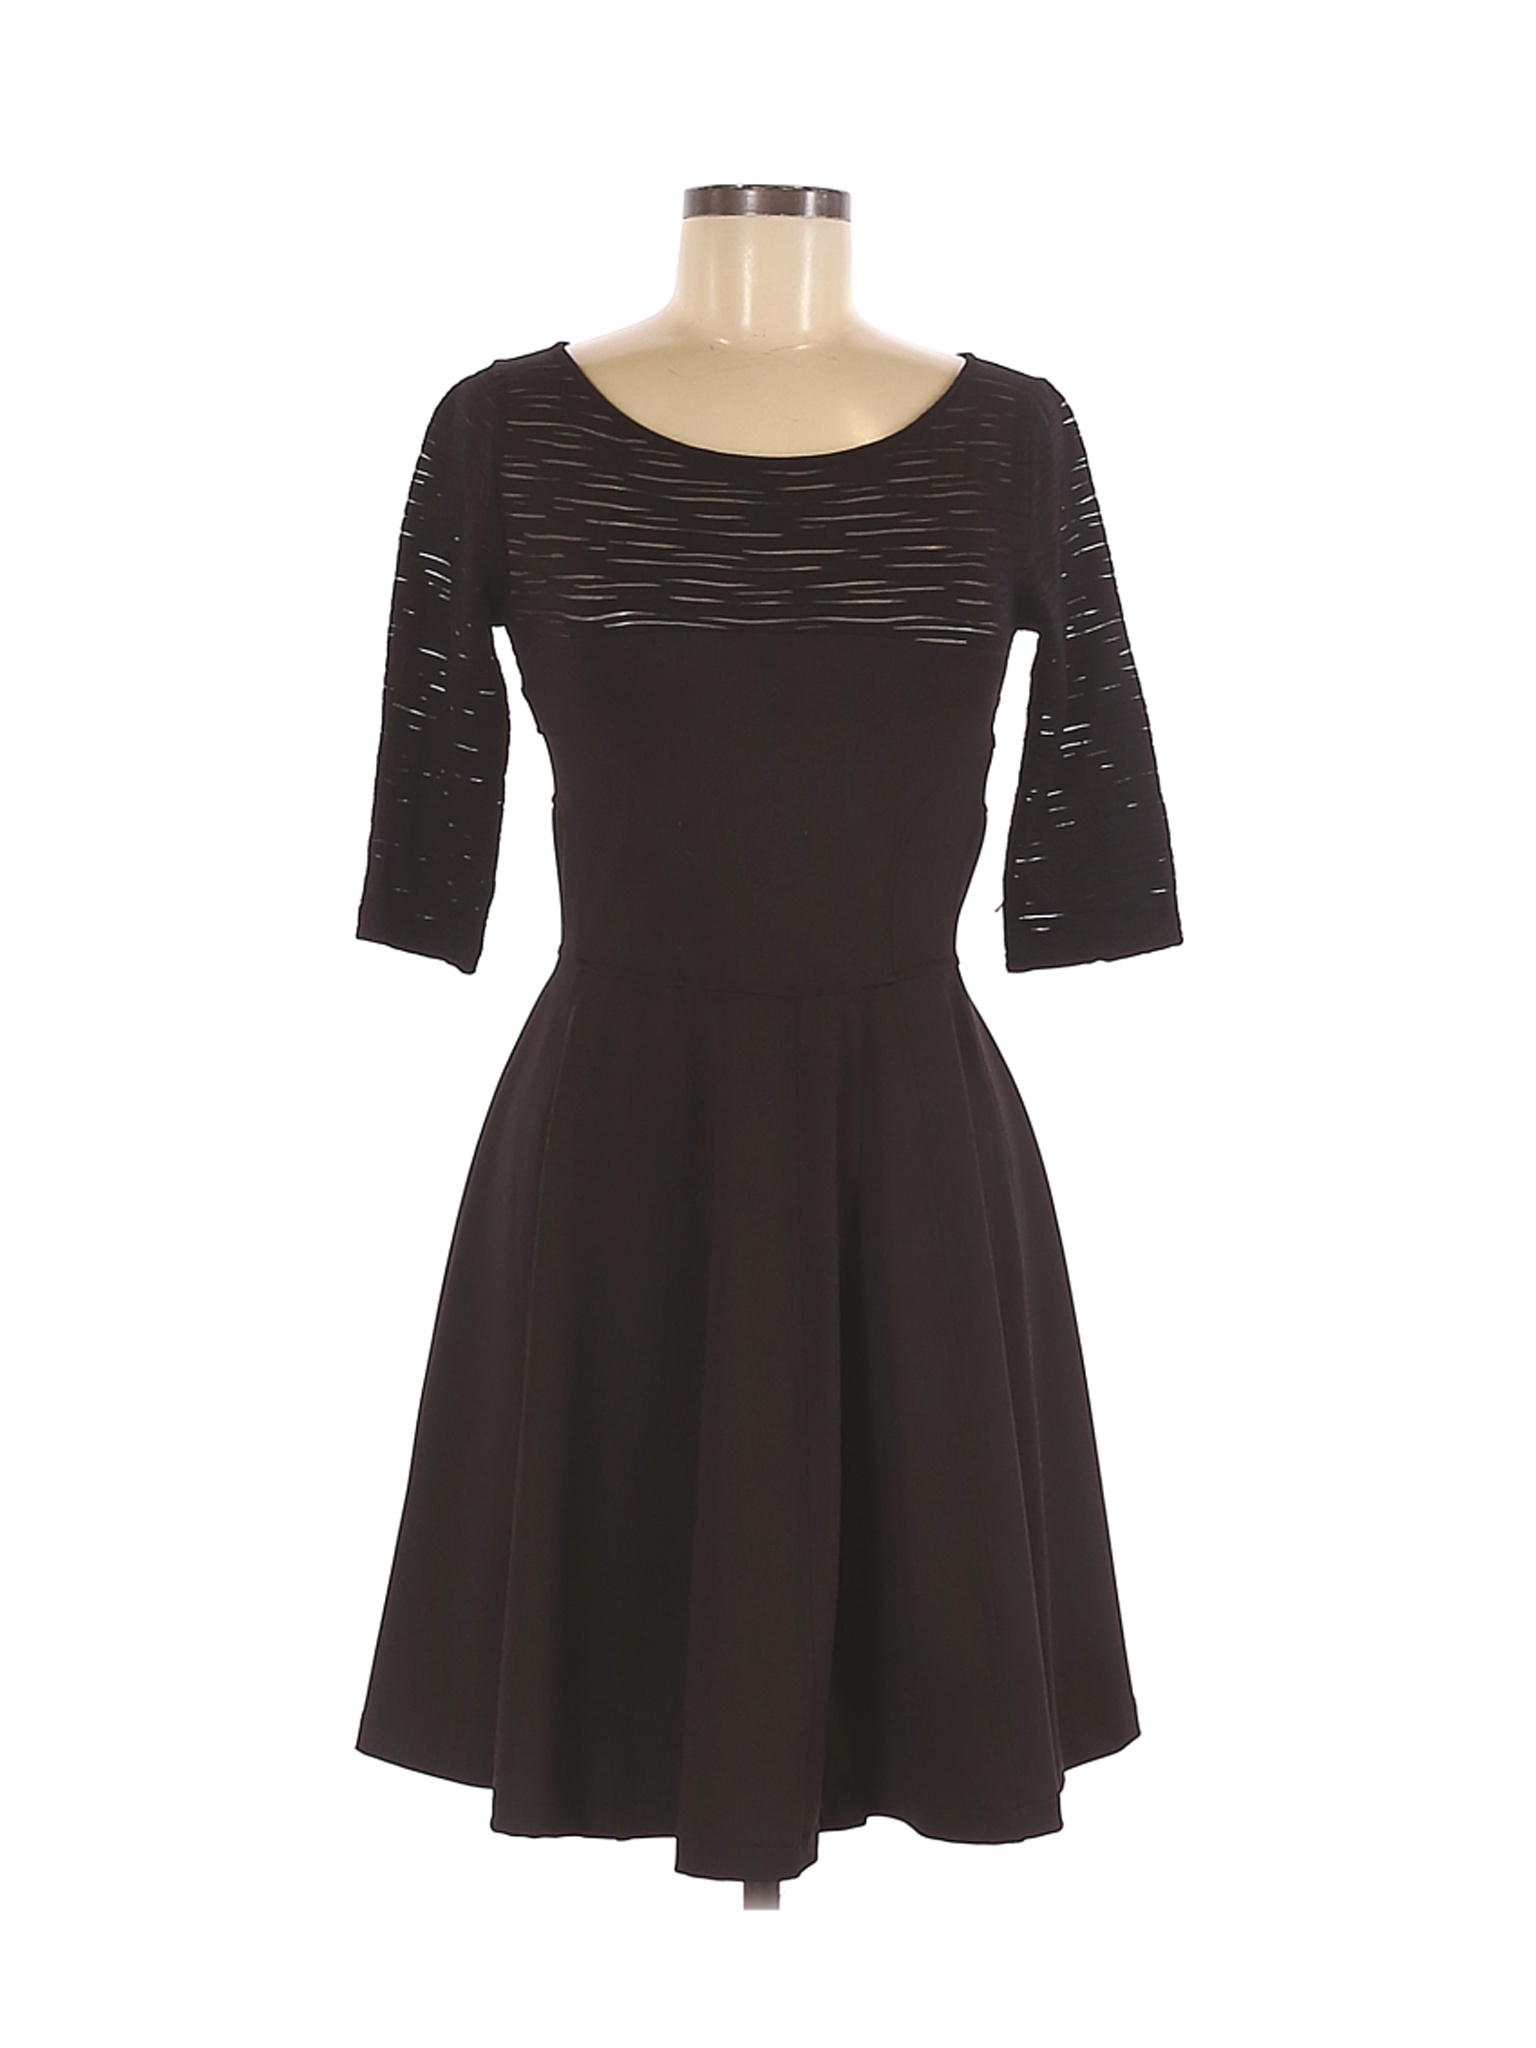 French Connection Women Black Cocktail Dress 6 | eBay